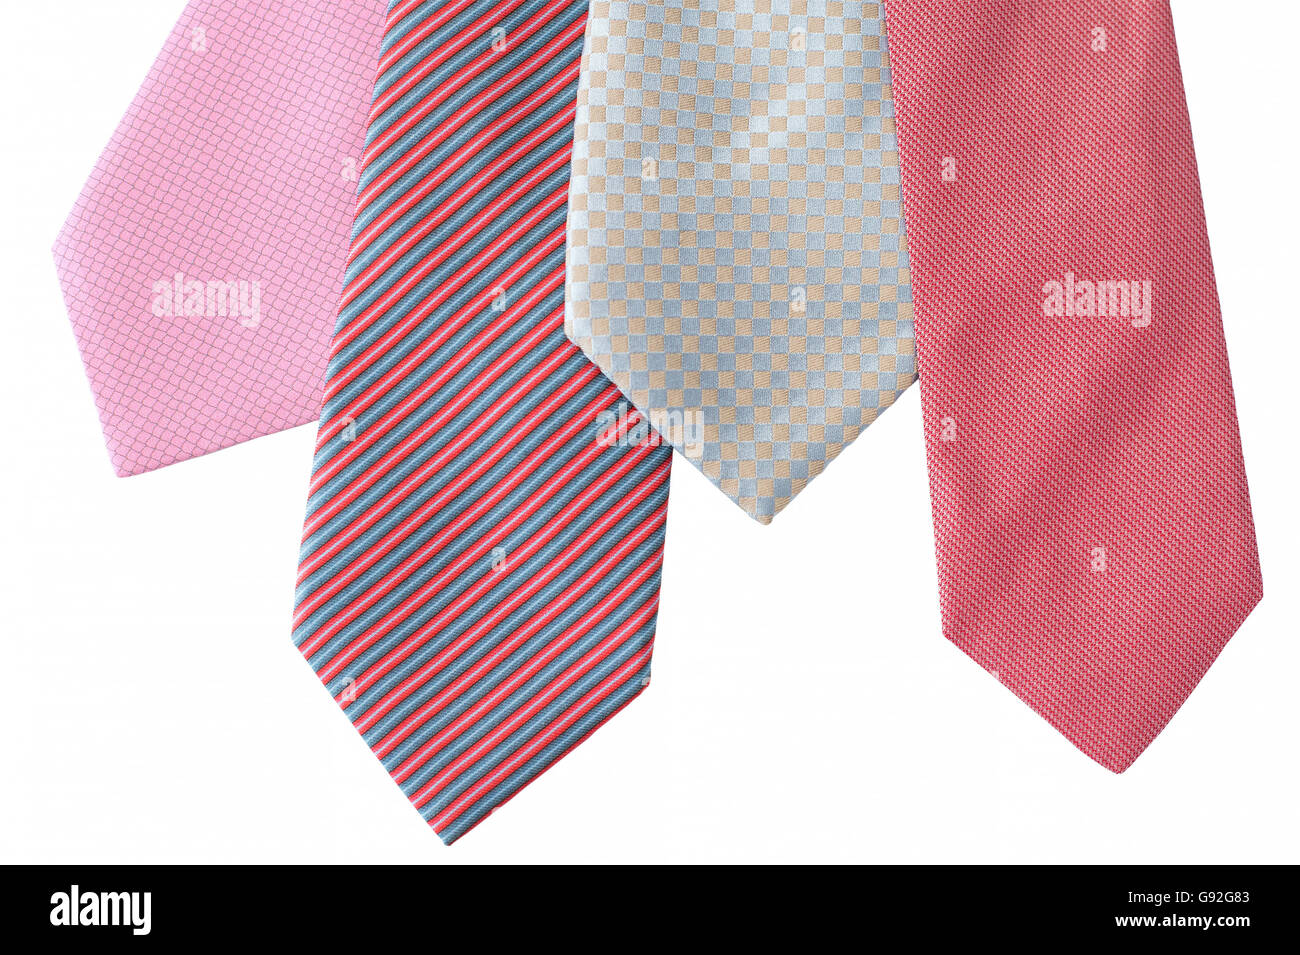 Sweet tie on white background, selected focus Stock Photo